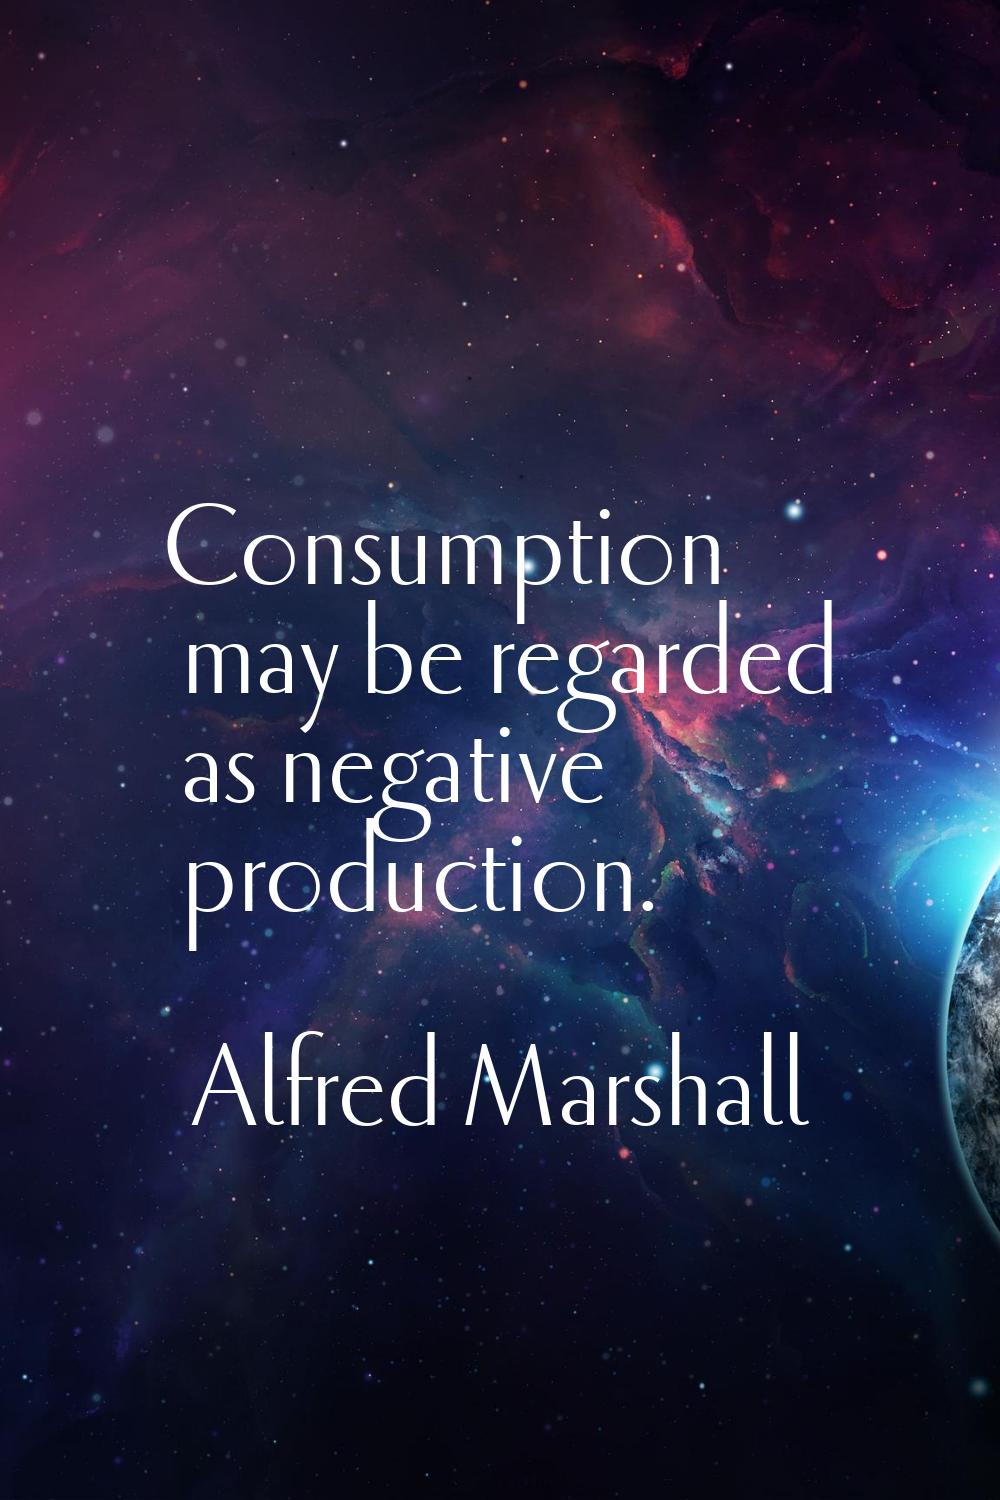 Consumption may be regarded as negative production.